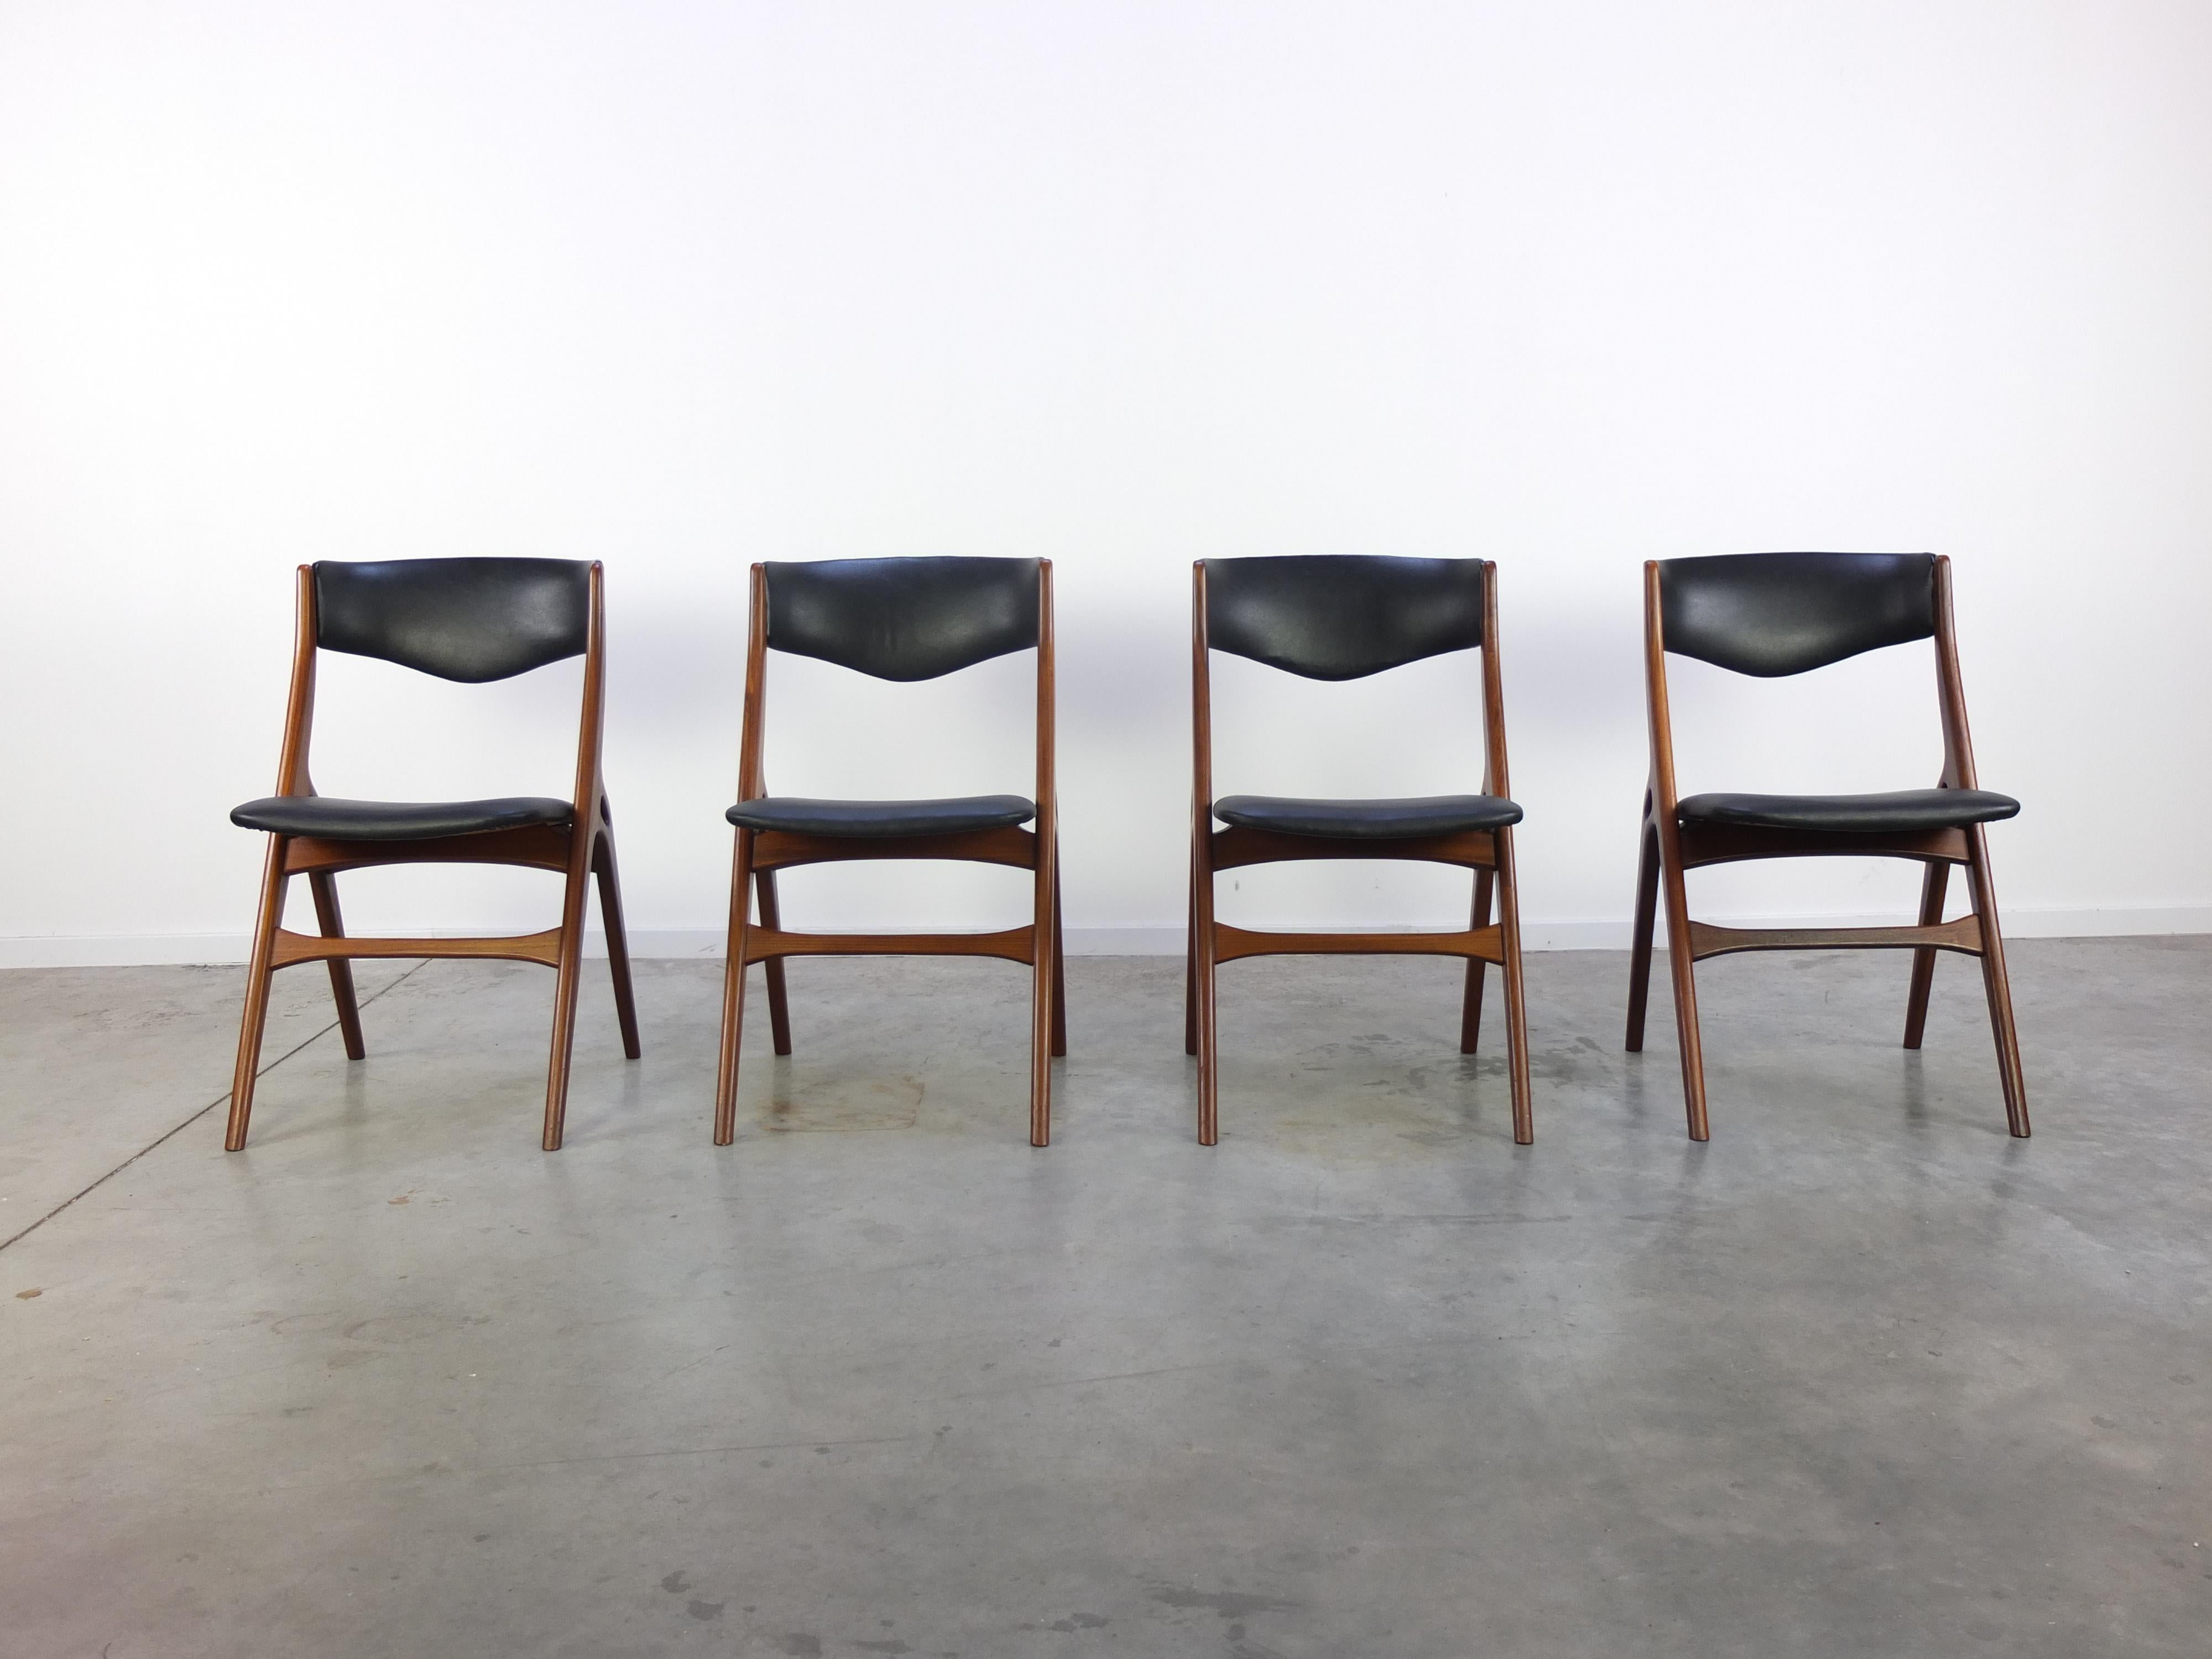 Great set of 4 ‘Aska’ dining chairs designed by Louis Van Teeffelen for Wébé during the early 1960s. They feature beautiful solid teak frames with black leatherette upholstery. The seats have been reupholstered and overall the chairs are in very